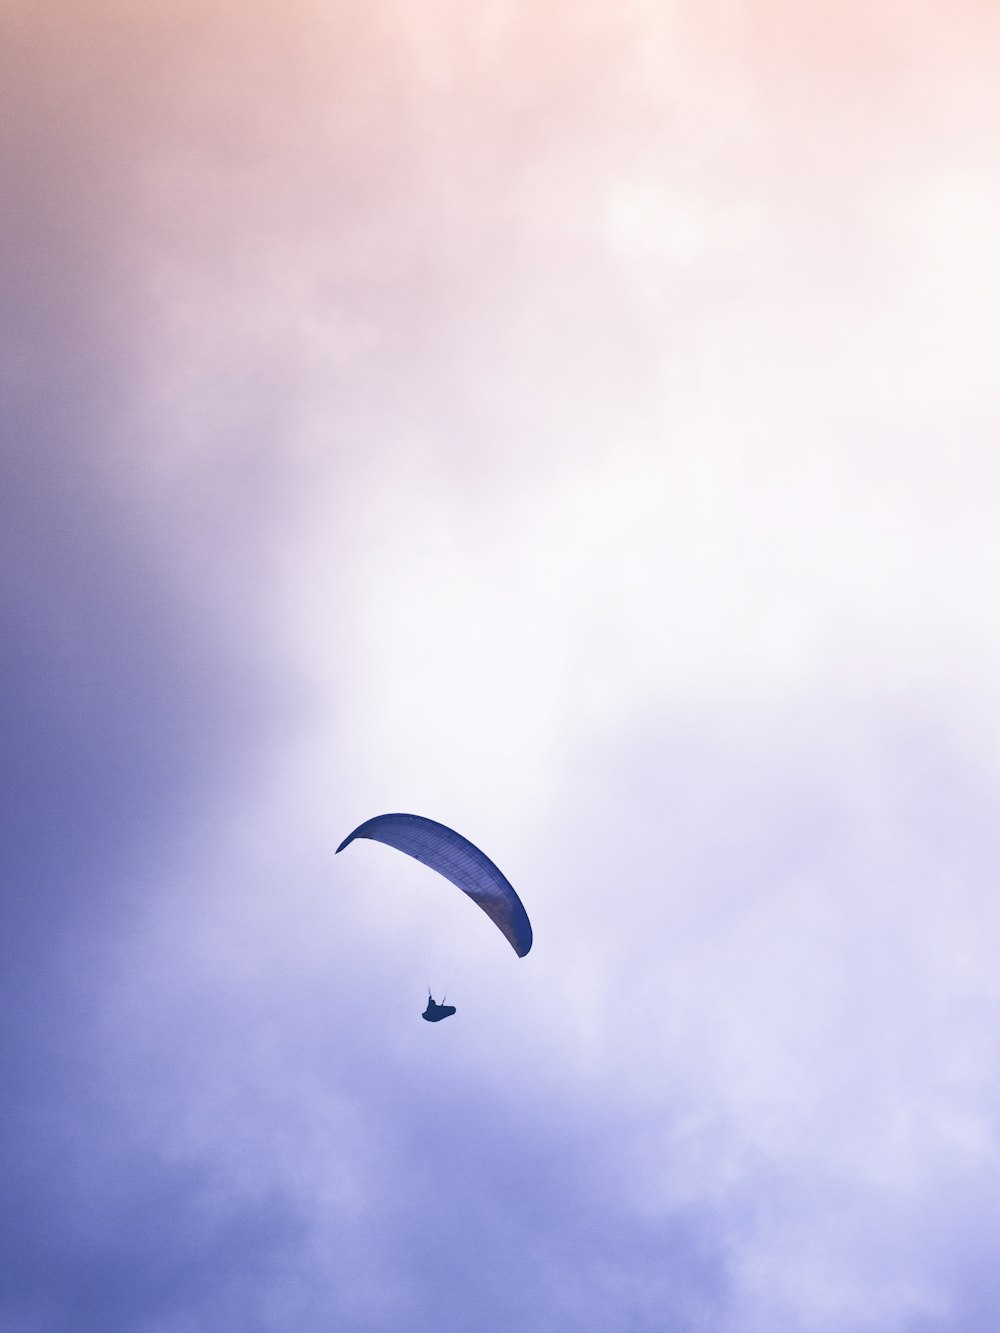 low angle photo of person paragliding